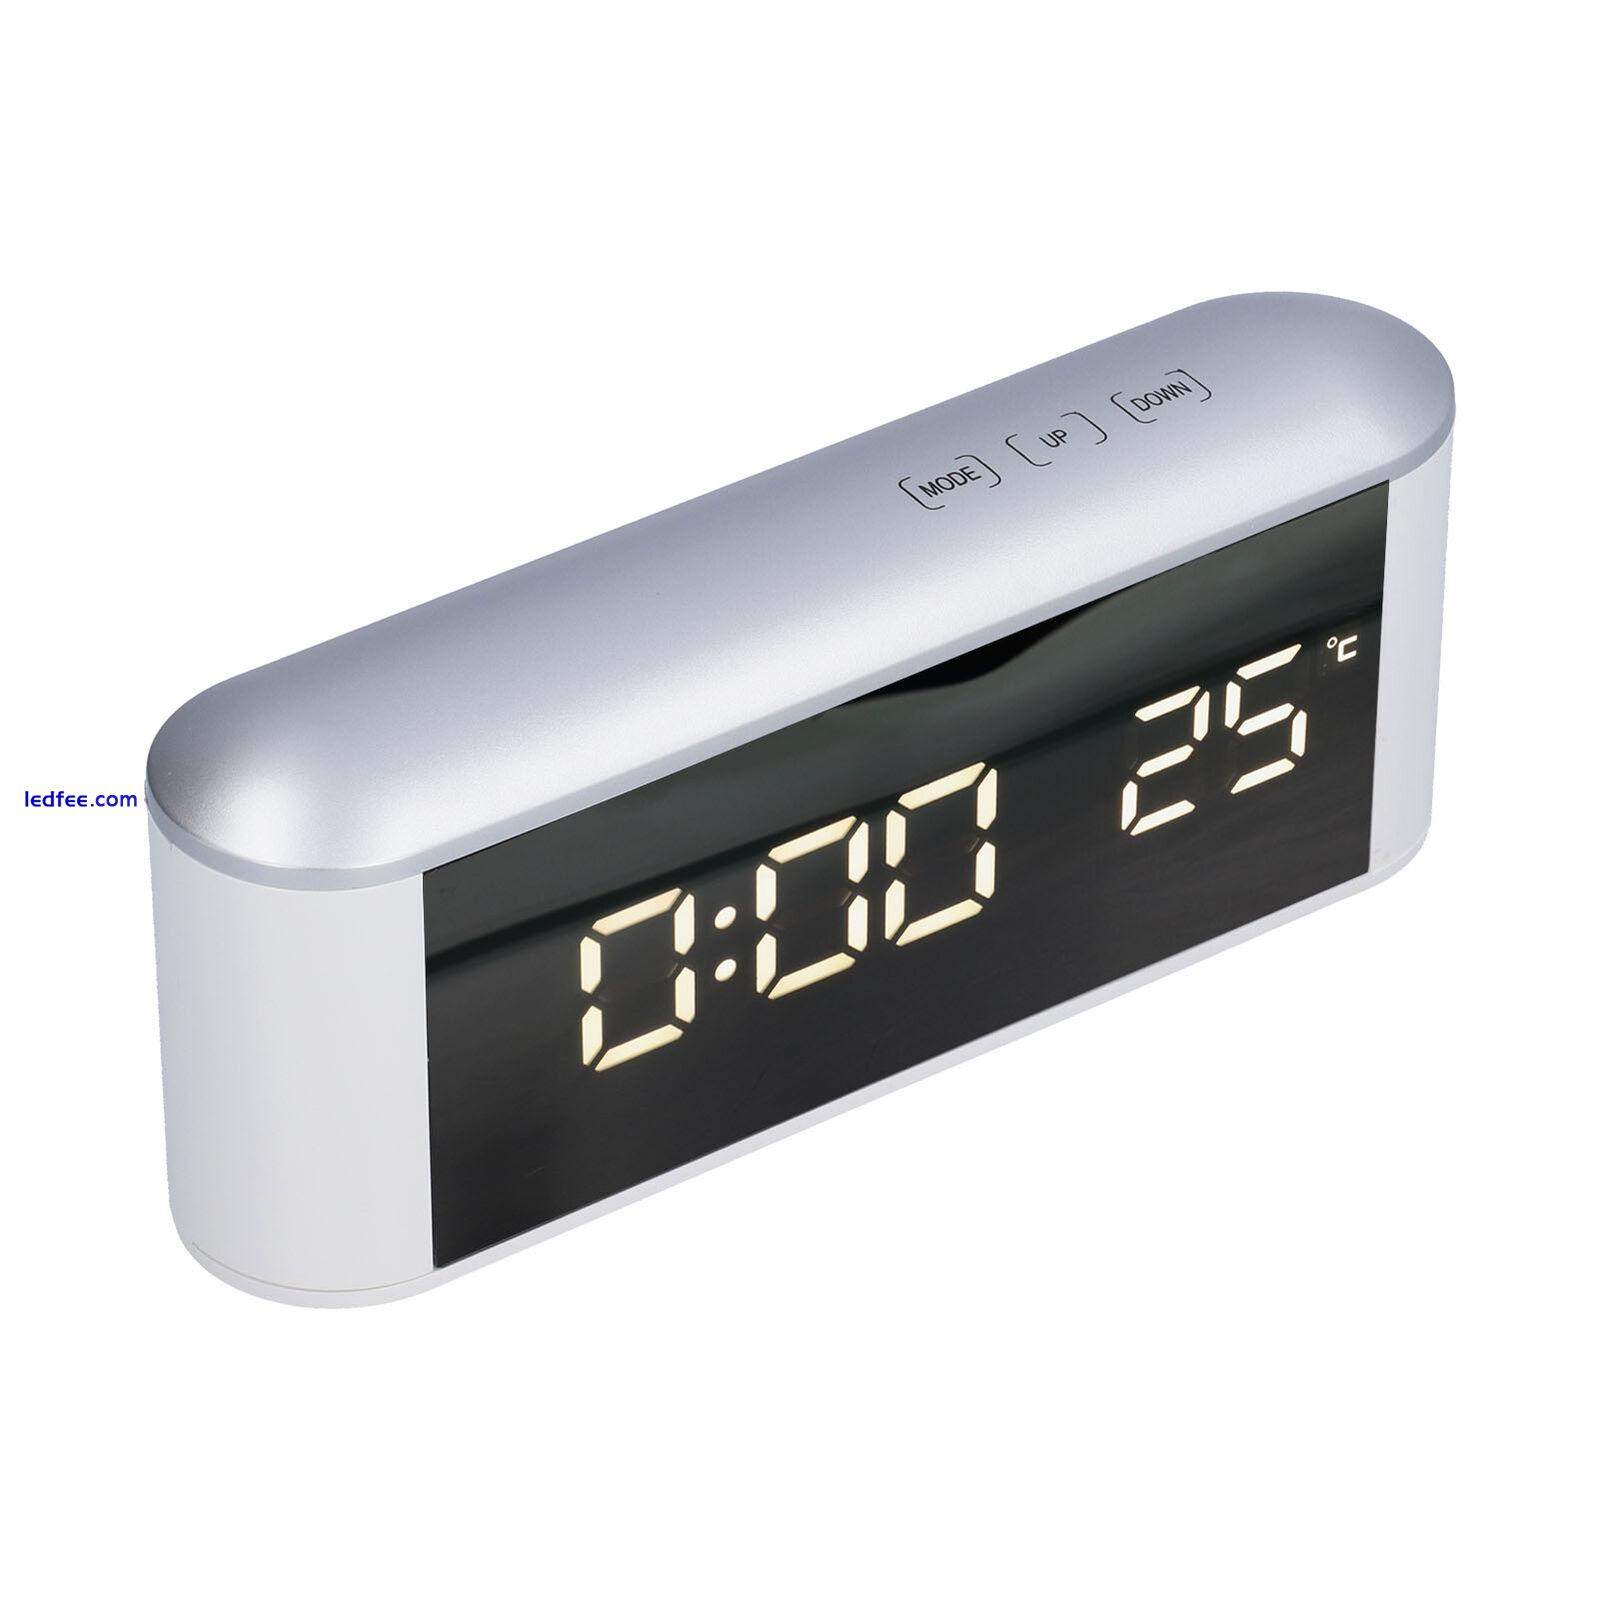 LED Alarm Clock Household Multifunctional Touch Screen Alarm Clock Indoor New 3 